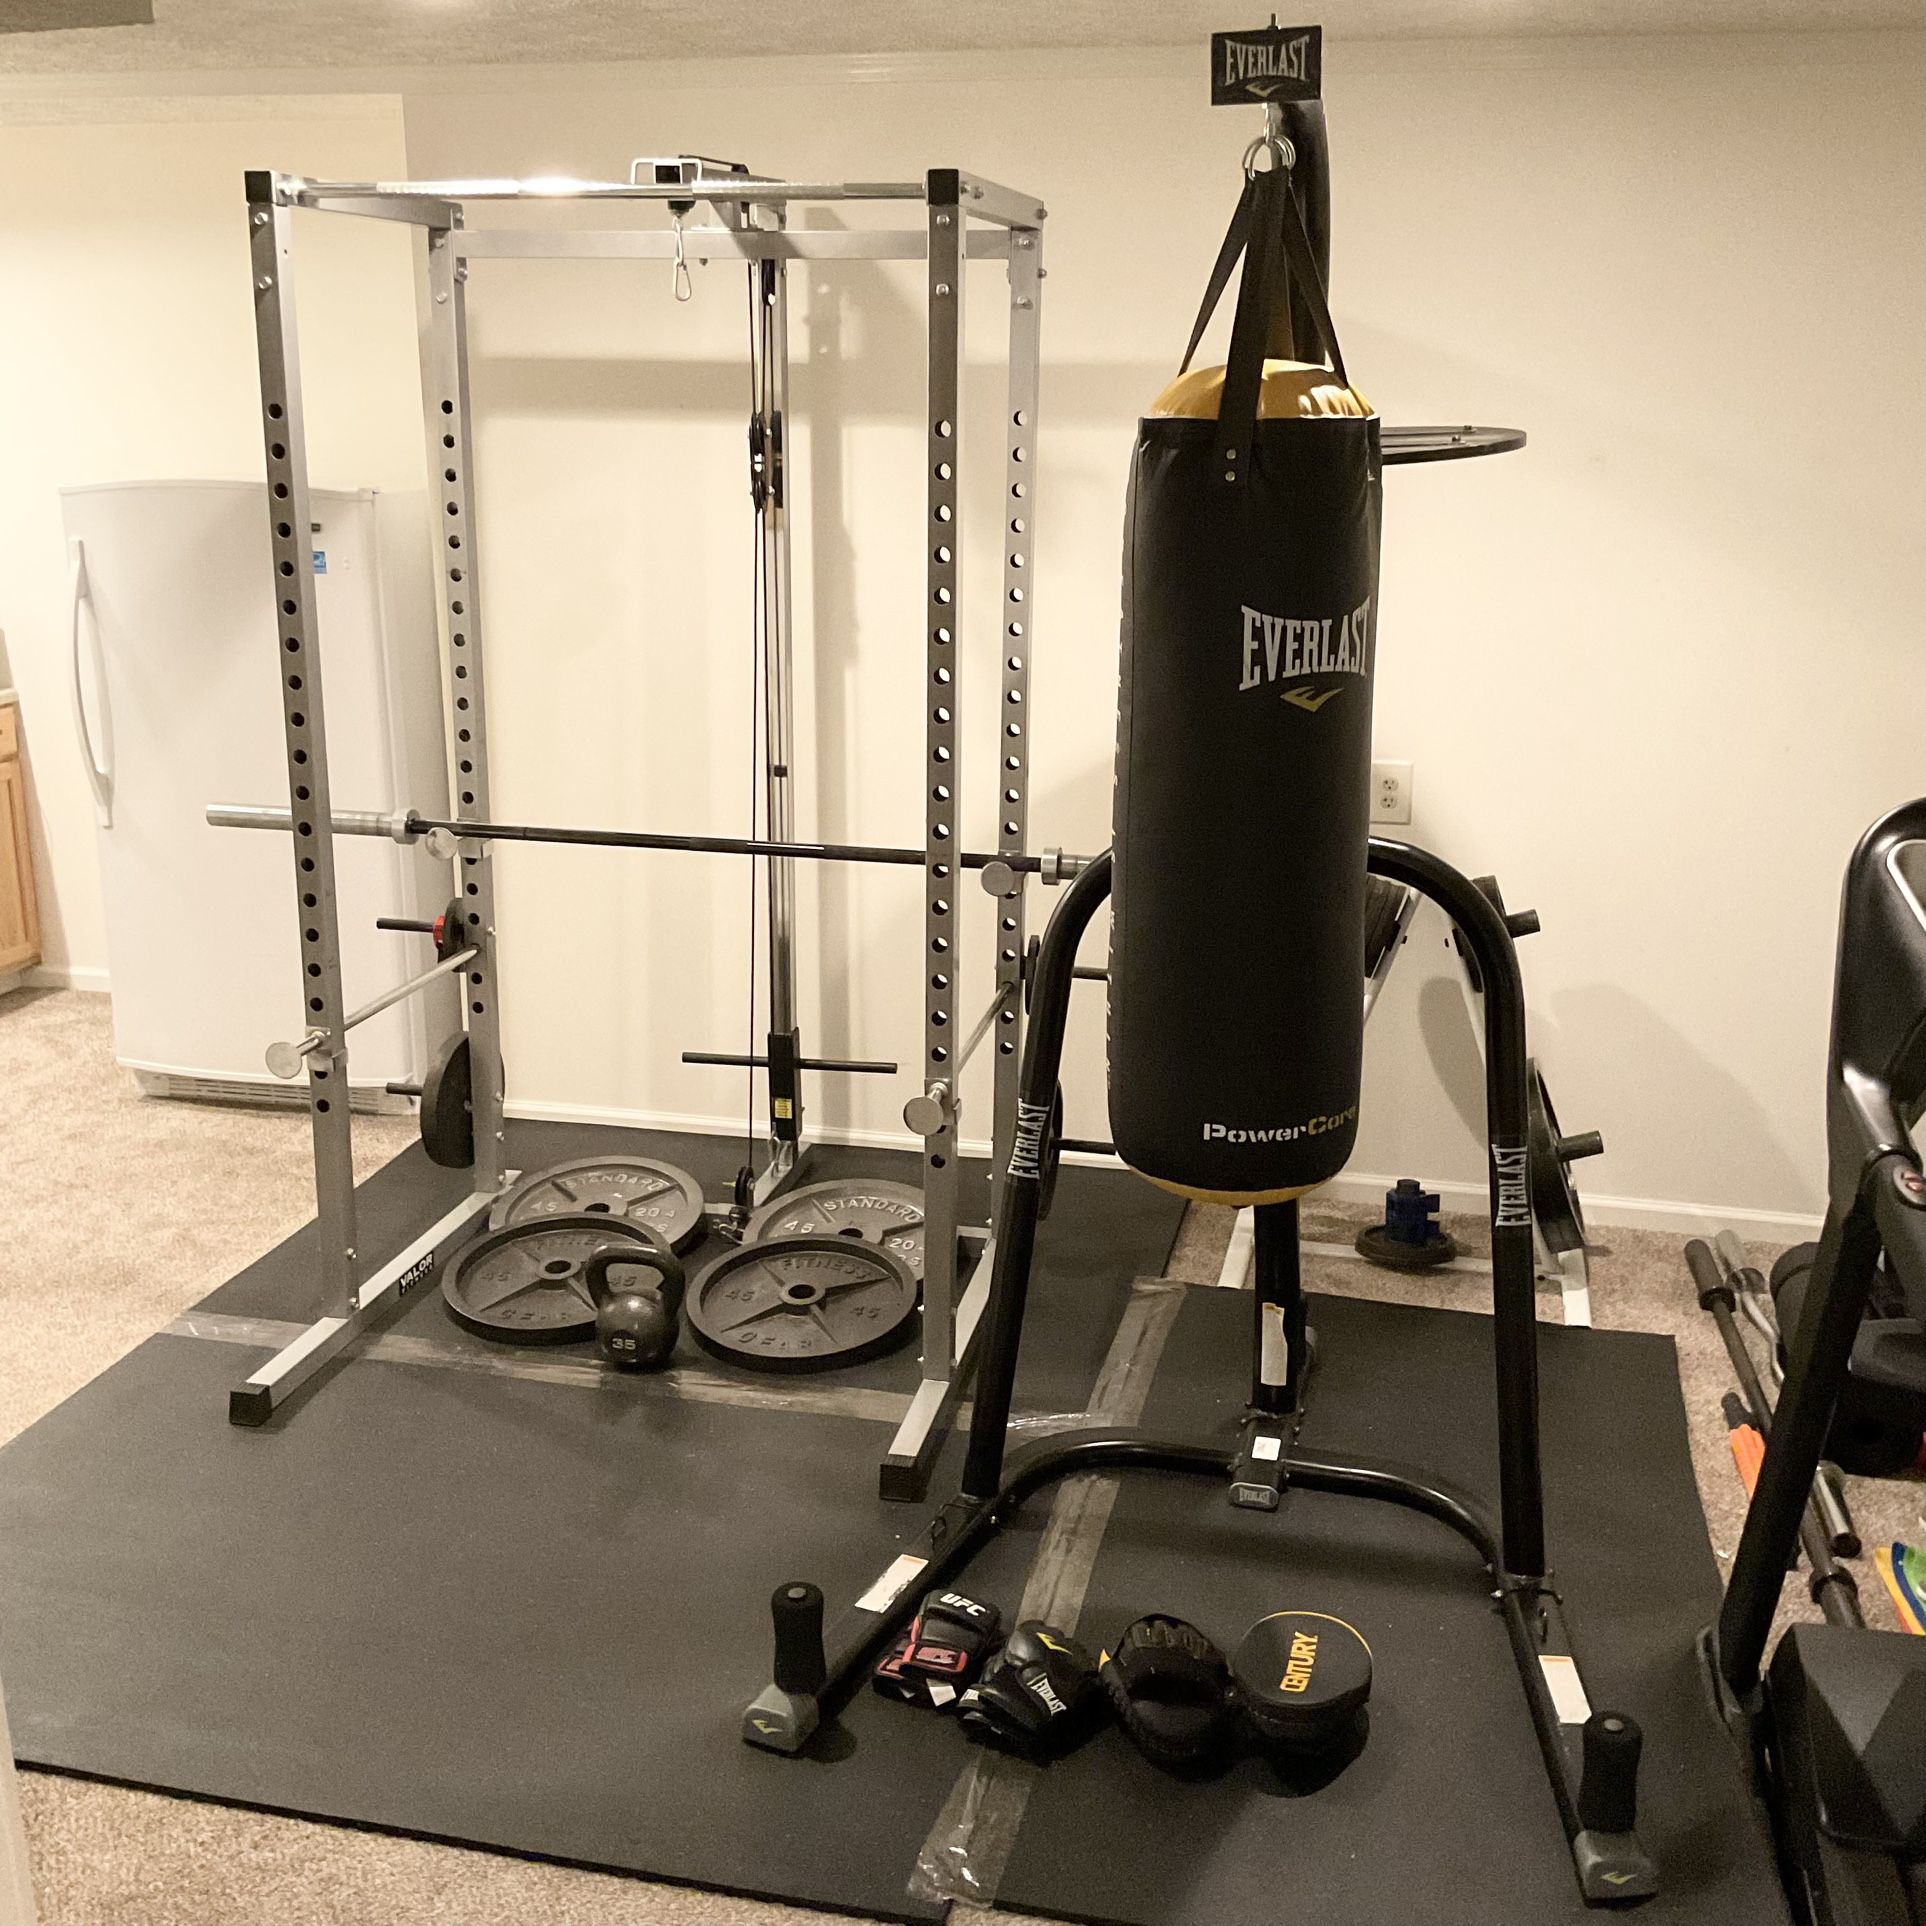 Squat Rack, Heavy Bag, Rogue Ohio Power Bar, 45 Pound Plates And Kettlebell